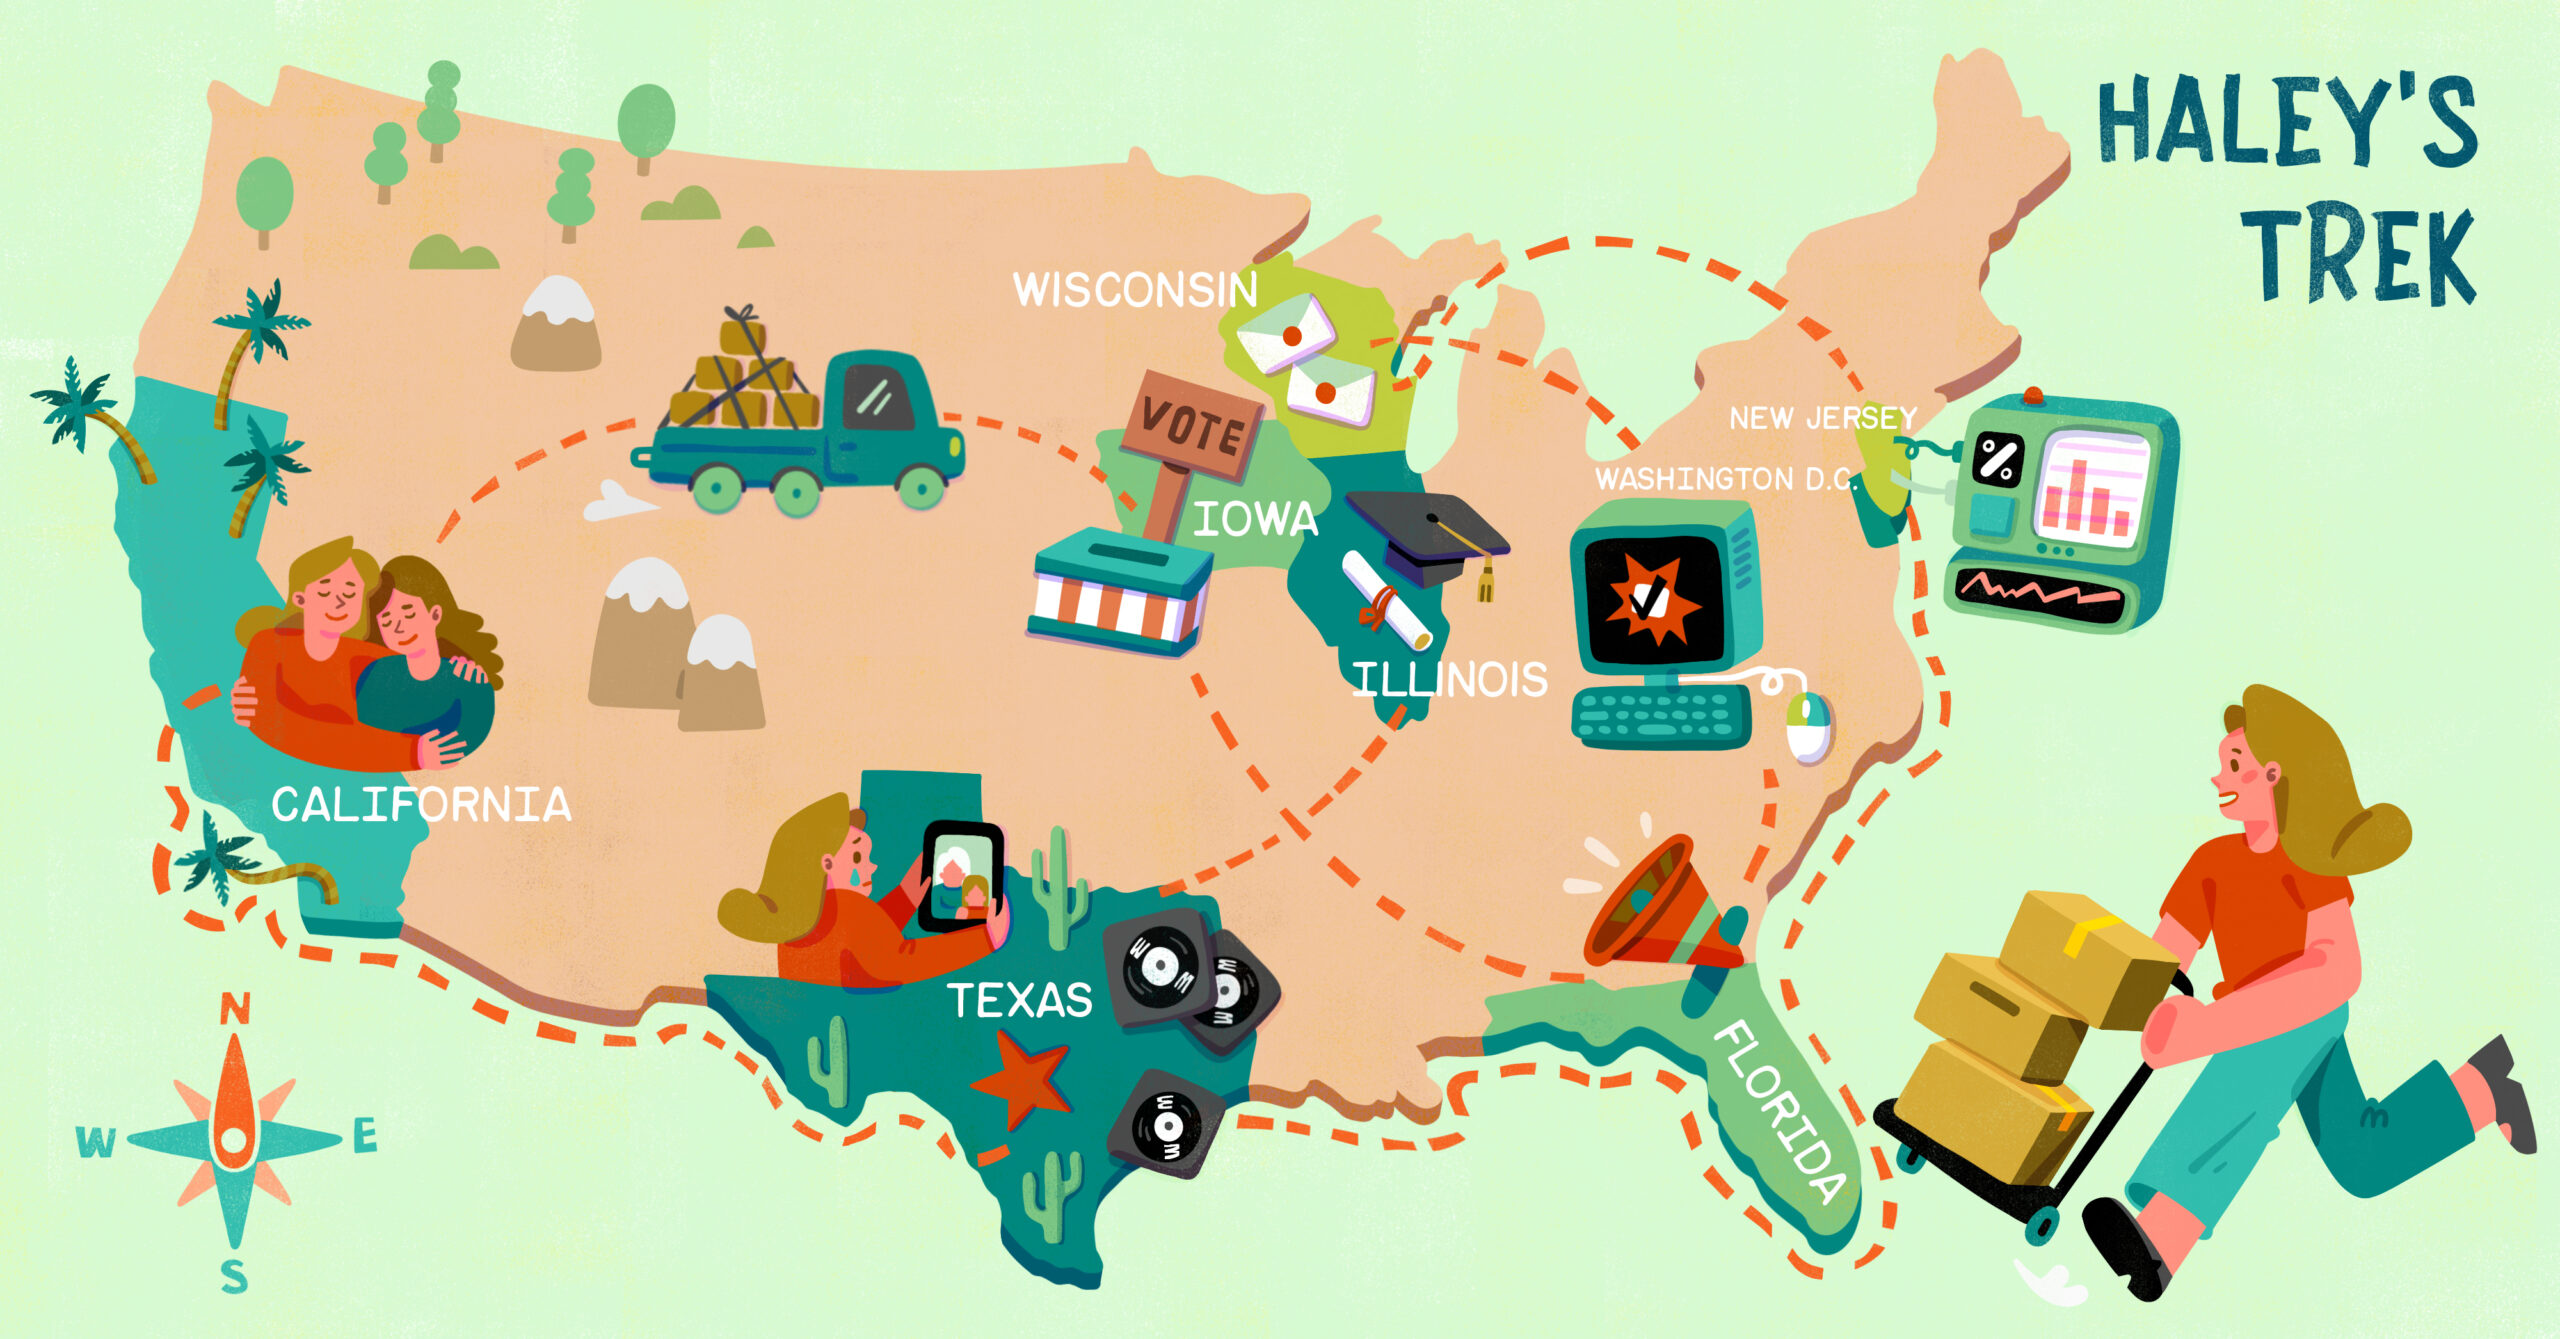 The illustration depicts a map of the United States highlighted with states that Haley has lived in. Each state is illustrated with Haley’s memory, such as sisterhood, campaign, and loss. The title “Haley’s Trek” is in the top right corner. In the bottom right corner, Haley pushes a cart with moving boxes.